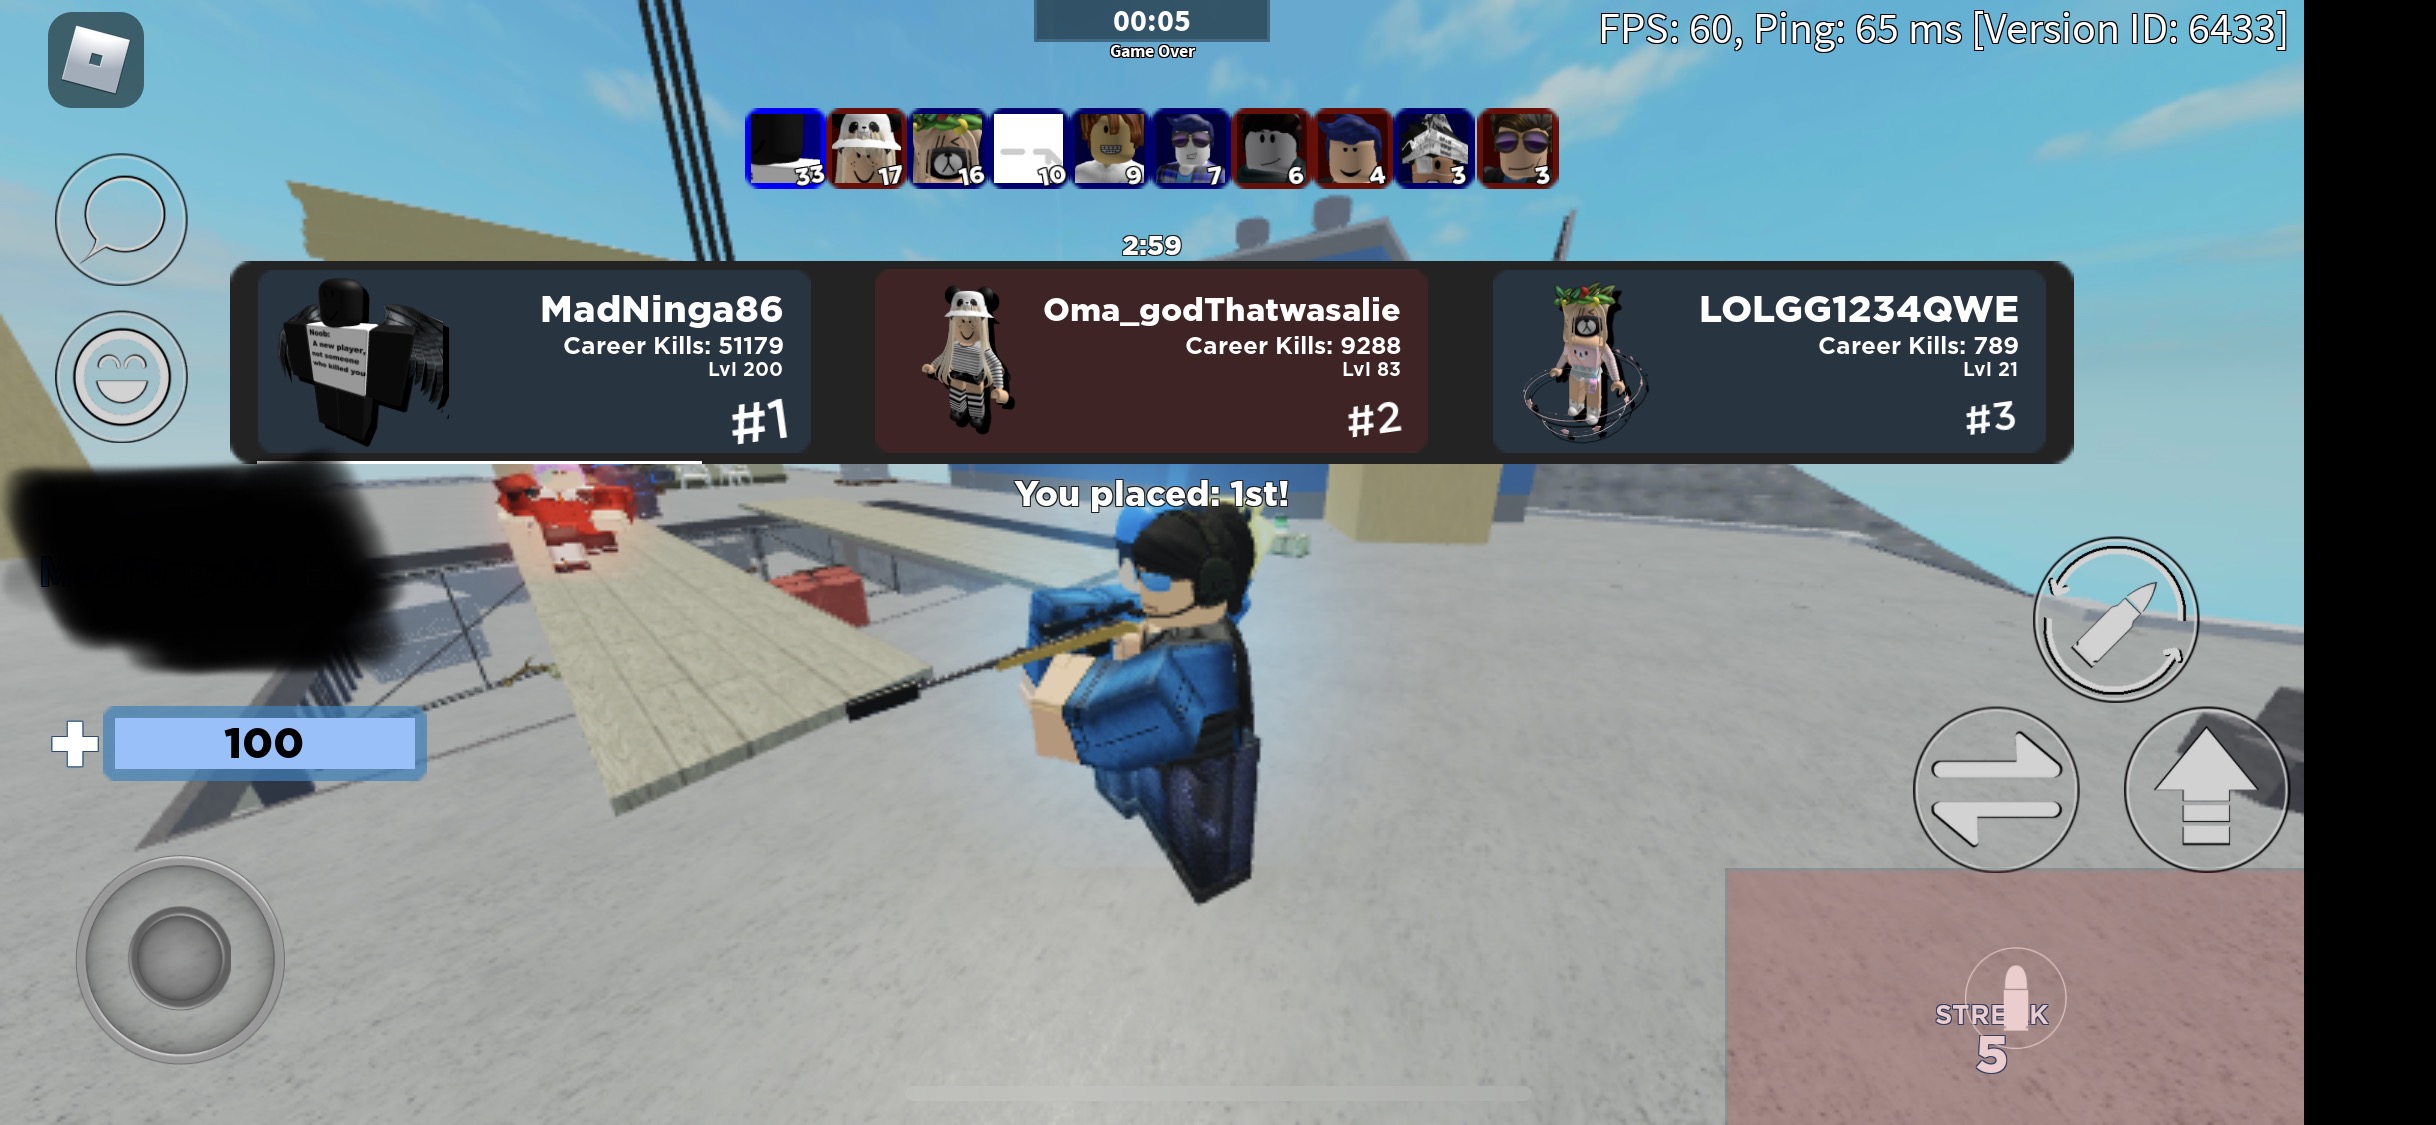 Lvl 200 Roblox - dungeonquestroblox instagram posts photos and videos picuki com